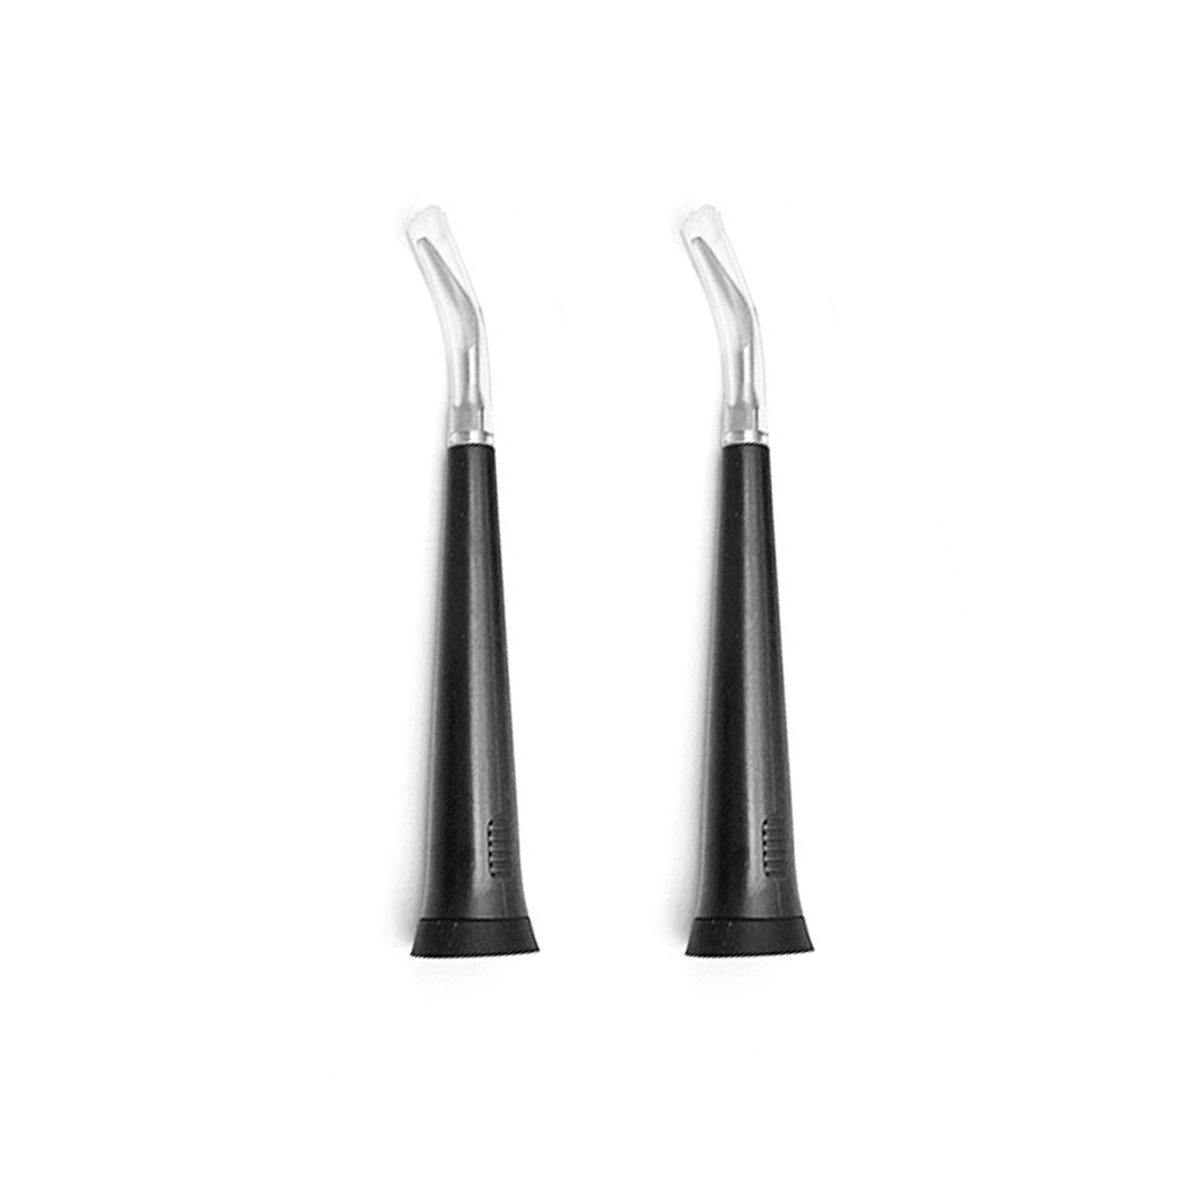 Ultrasonic Tooth Cleaner NEXT GENERATION™ Replacement Head 2 Pack - Oraly